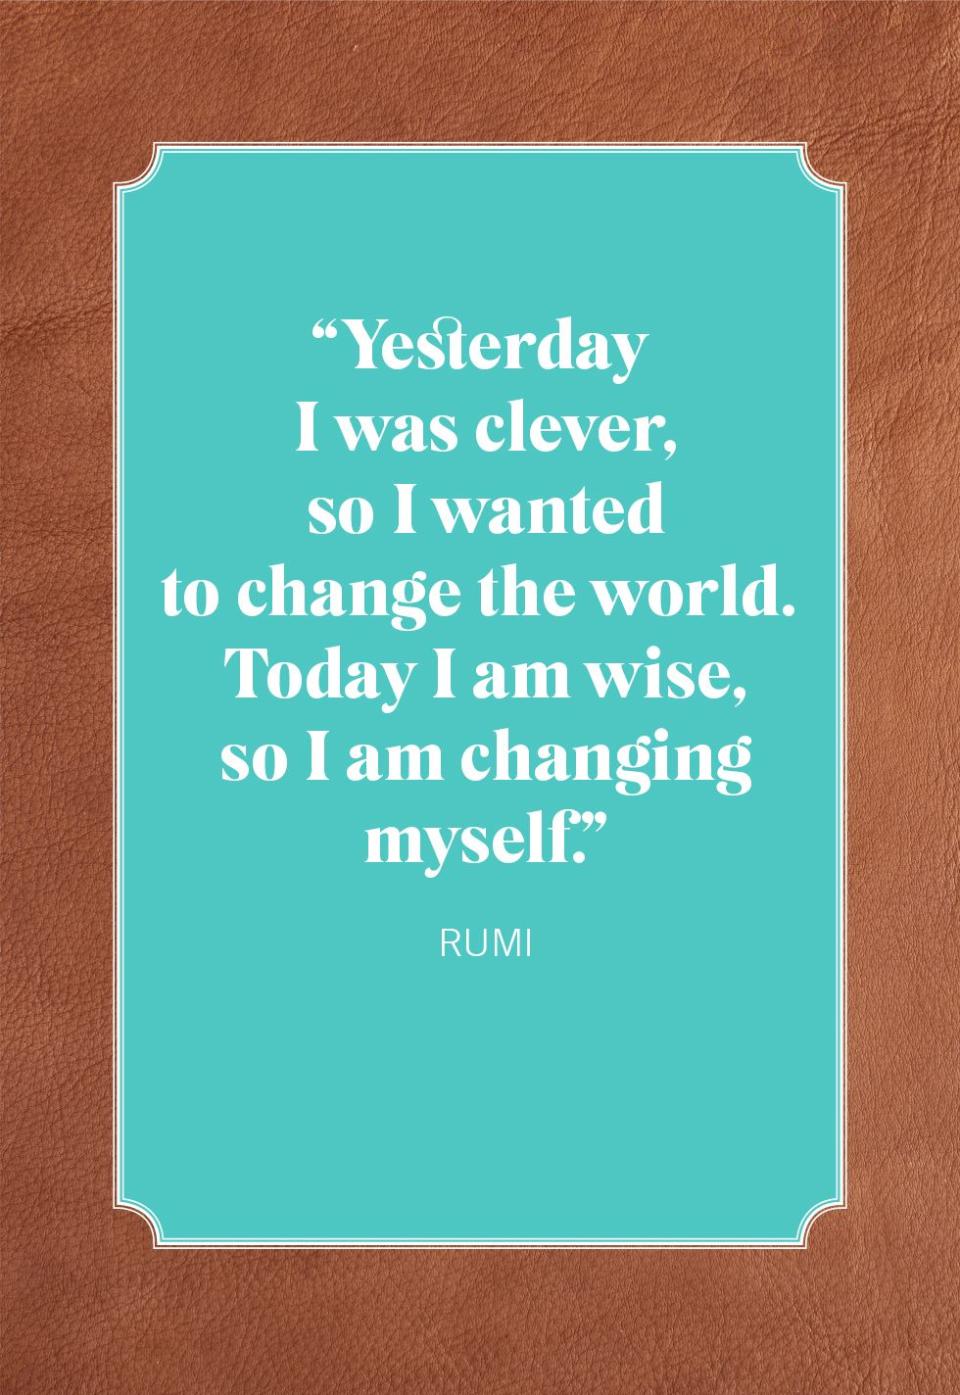 rumi quotes about change